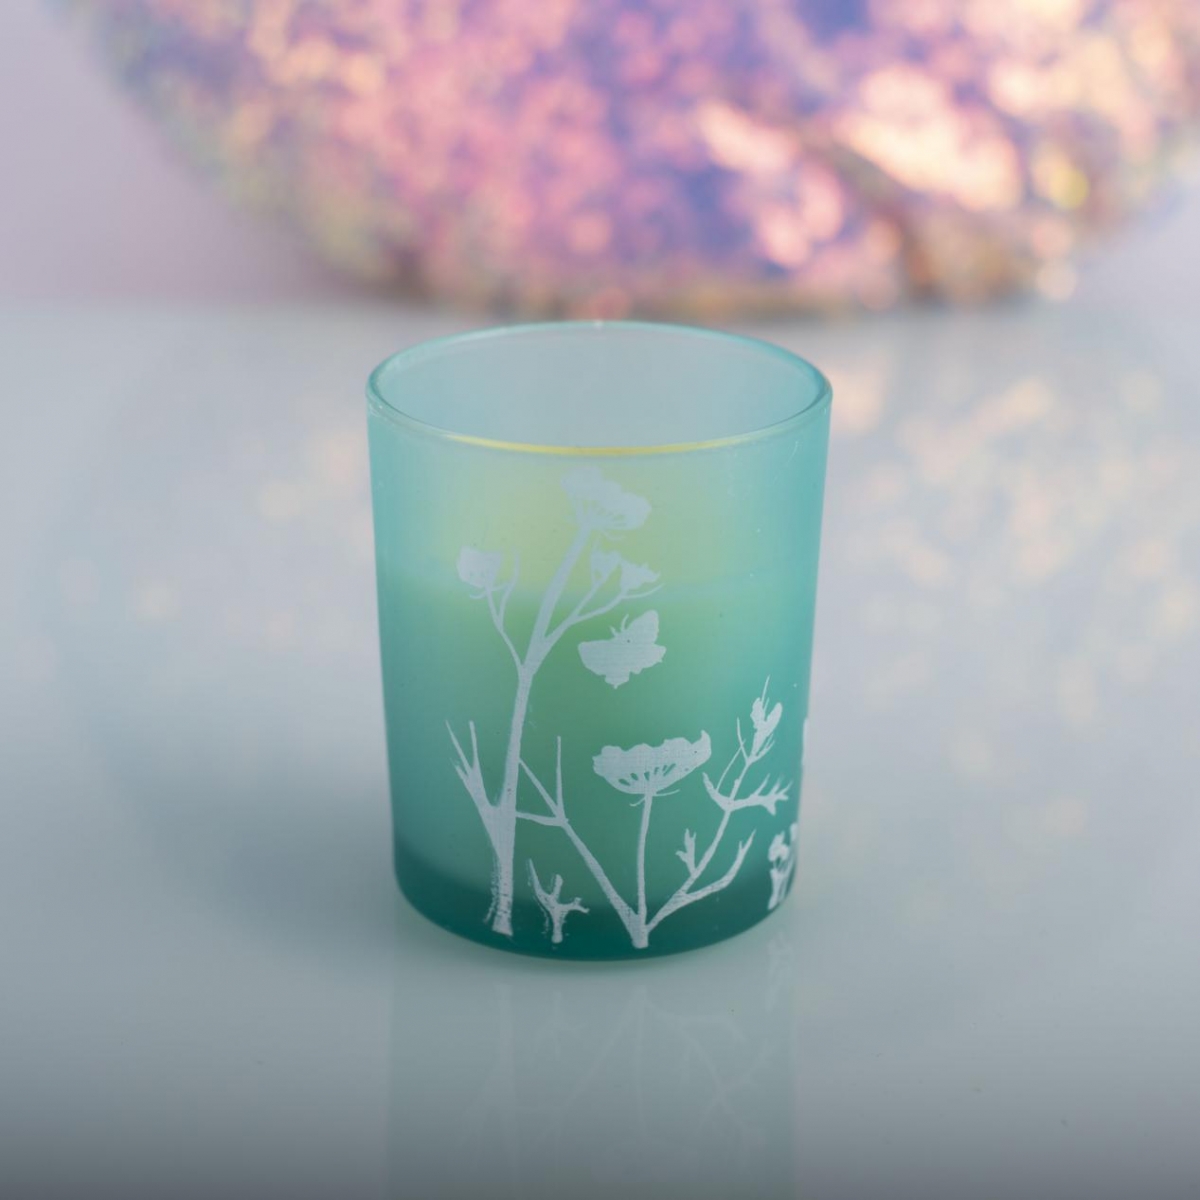 Scented Candles ：Fresh Cut Grass , Flower Printing , Vegan Candles ,China Factory , Cheapest Price-HOWCANDLE-Candles,Scented Candles,Aromatherapy Candles,Soy Candles,Vegan Candles,Jar Candles,Pillar Candles,Candle Gift Sets,Essential Oils,Reed Diffuser,Candle Holder,